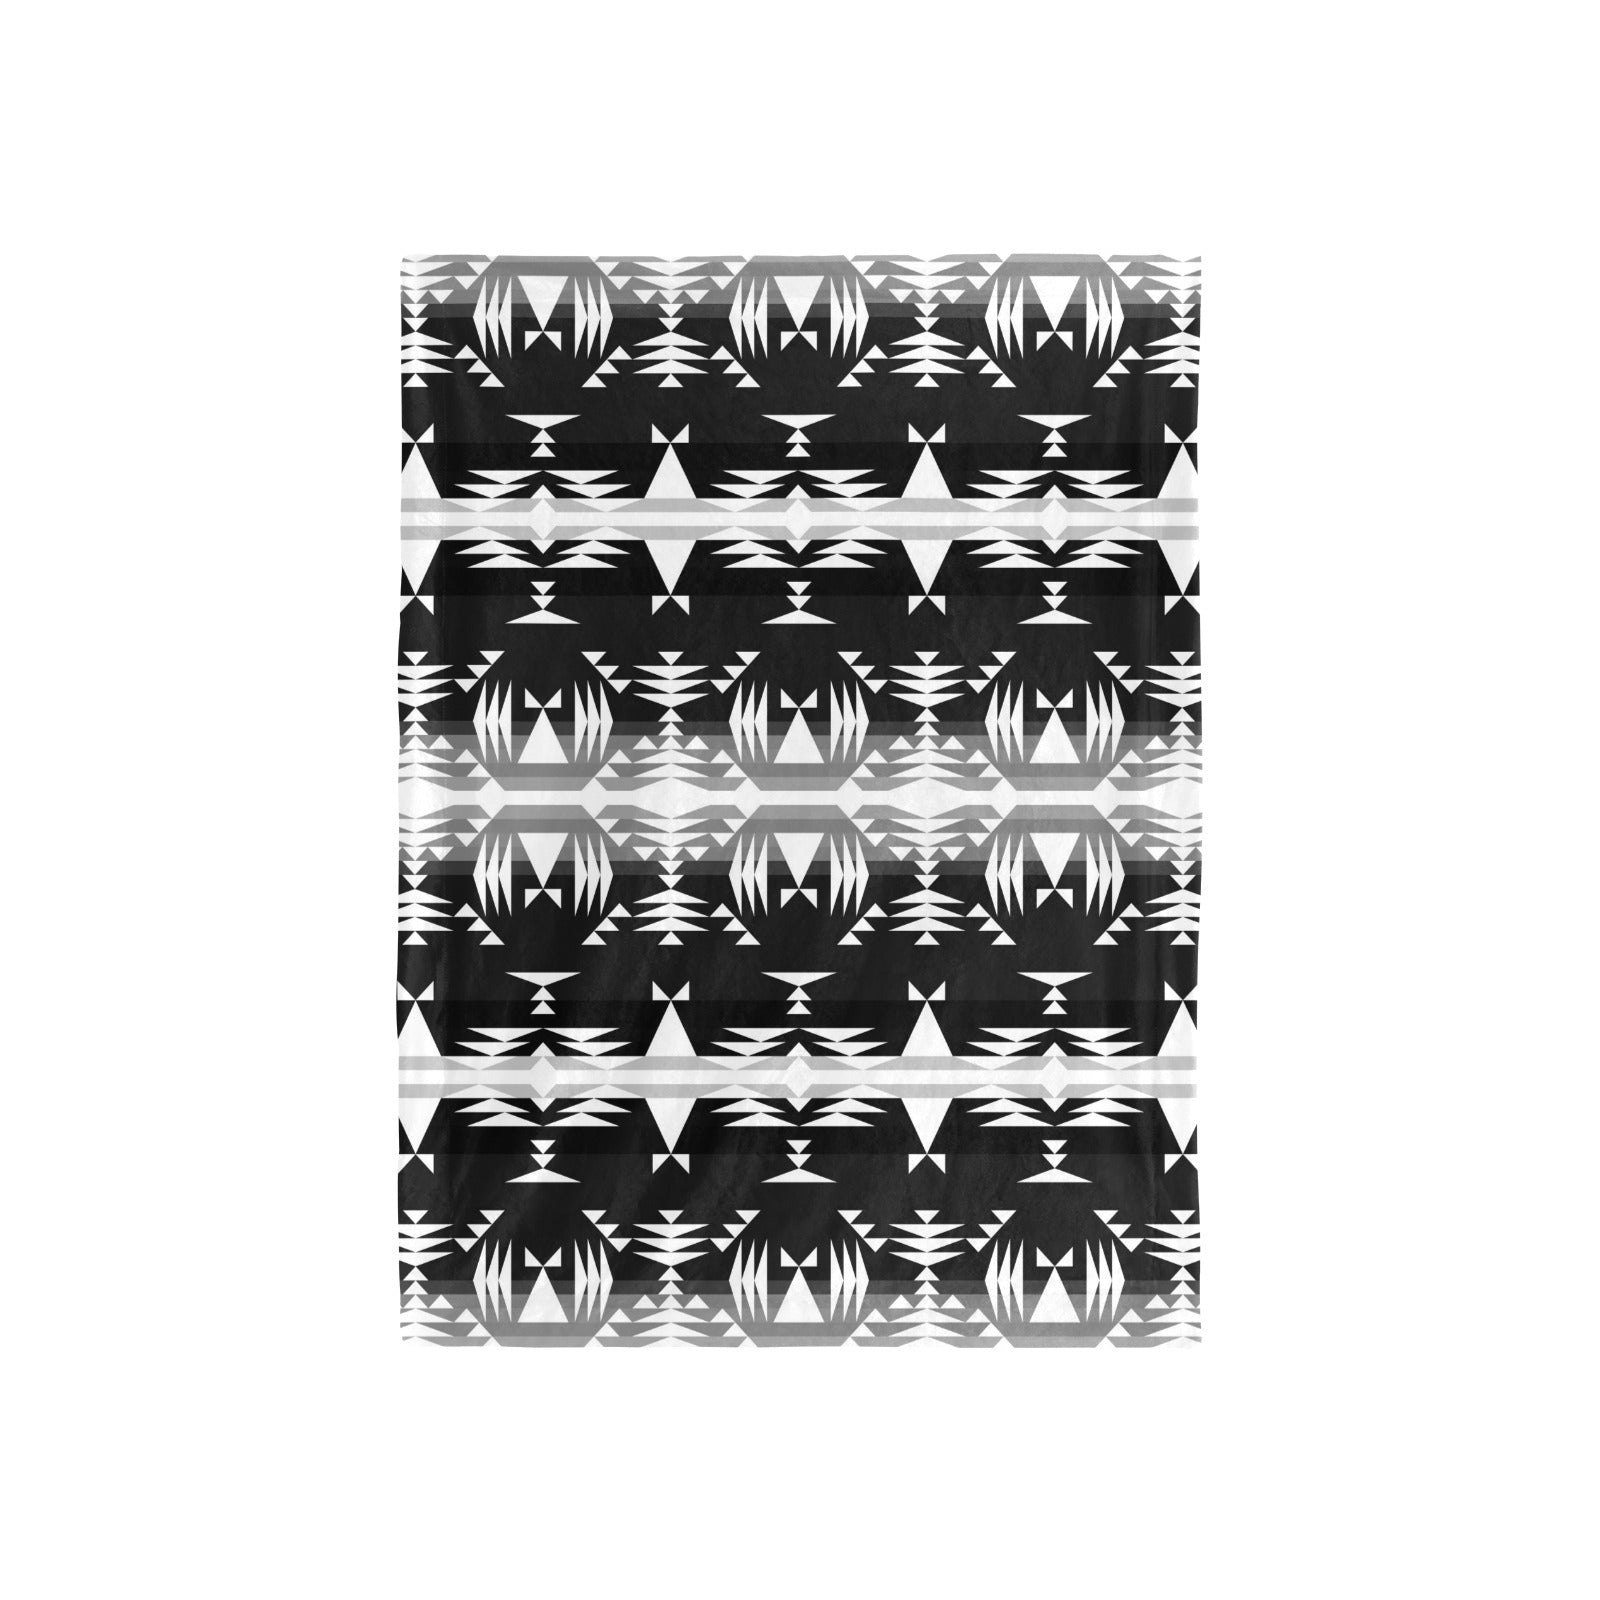 Between the Mountains Black and White Baby Blanket 40"x50" Baby Blanket 40"x50" e-joyer 